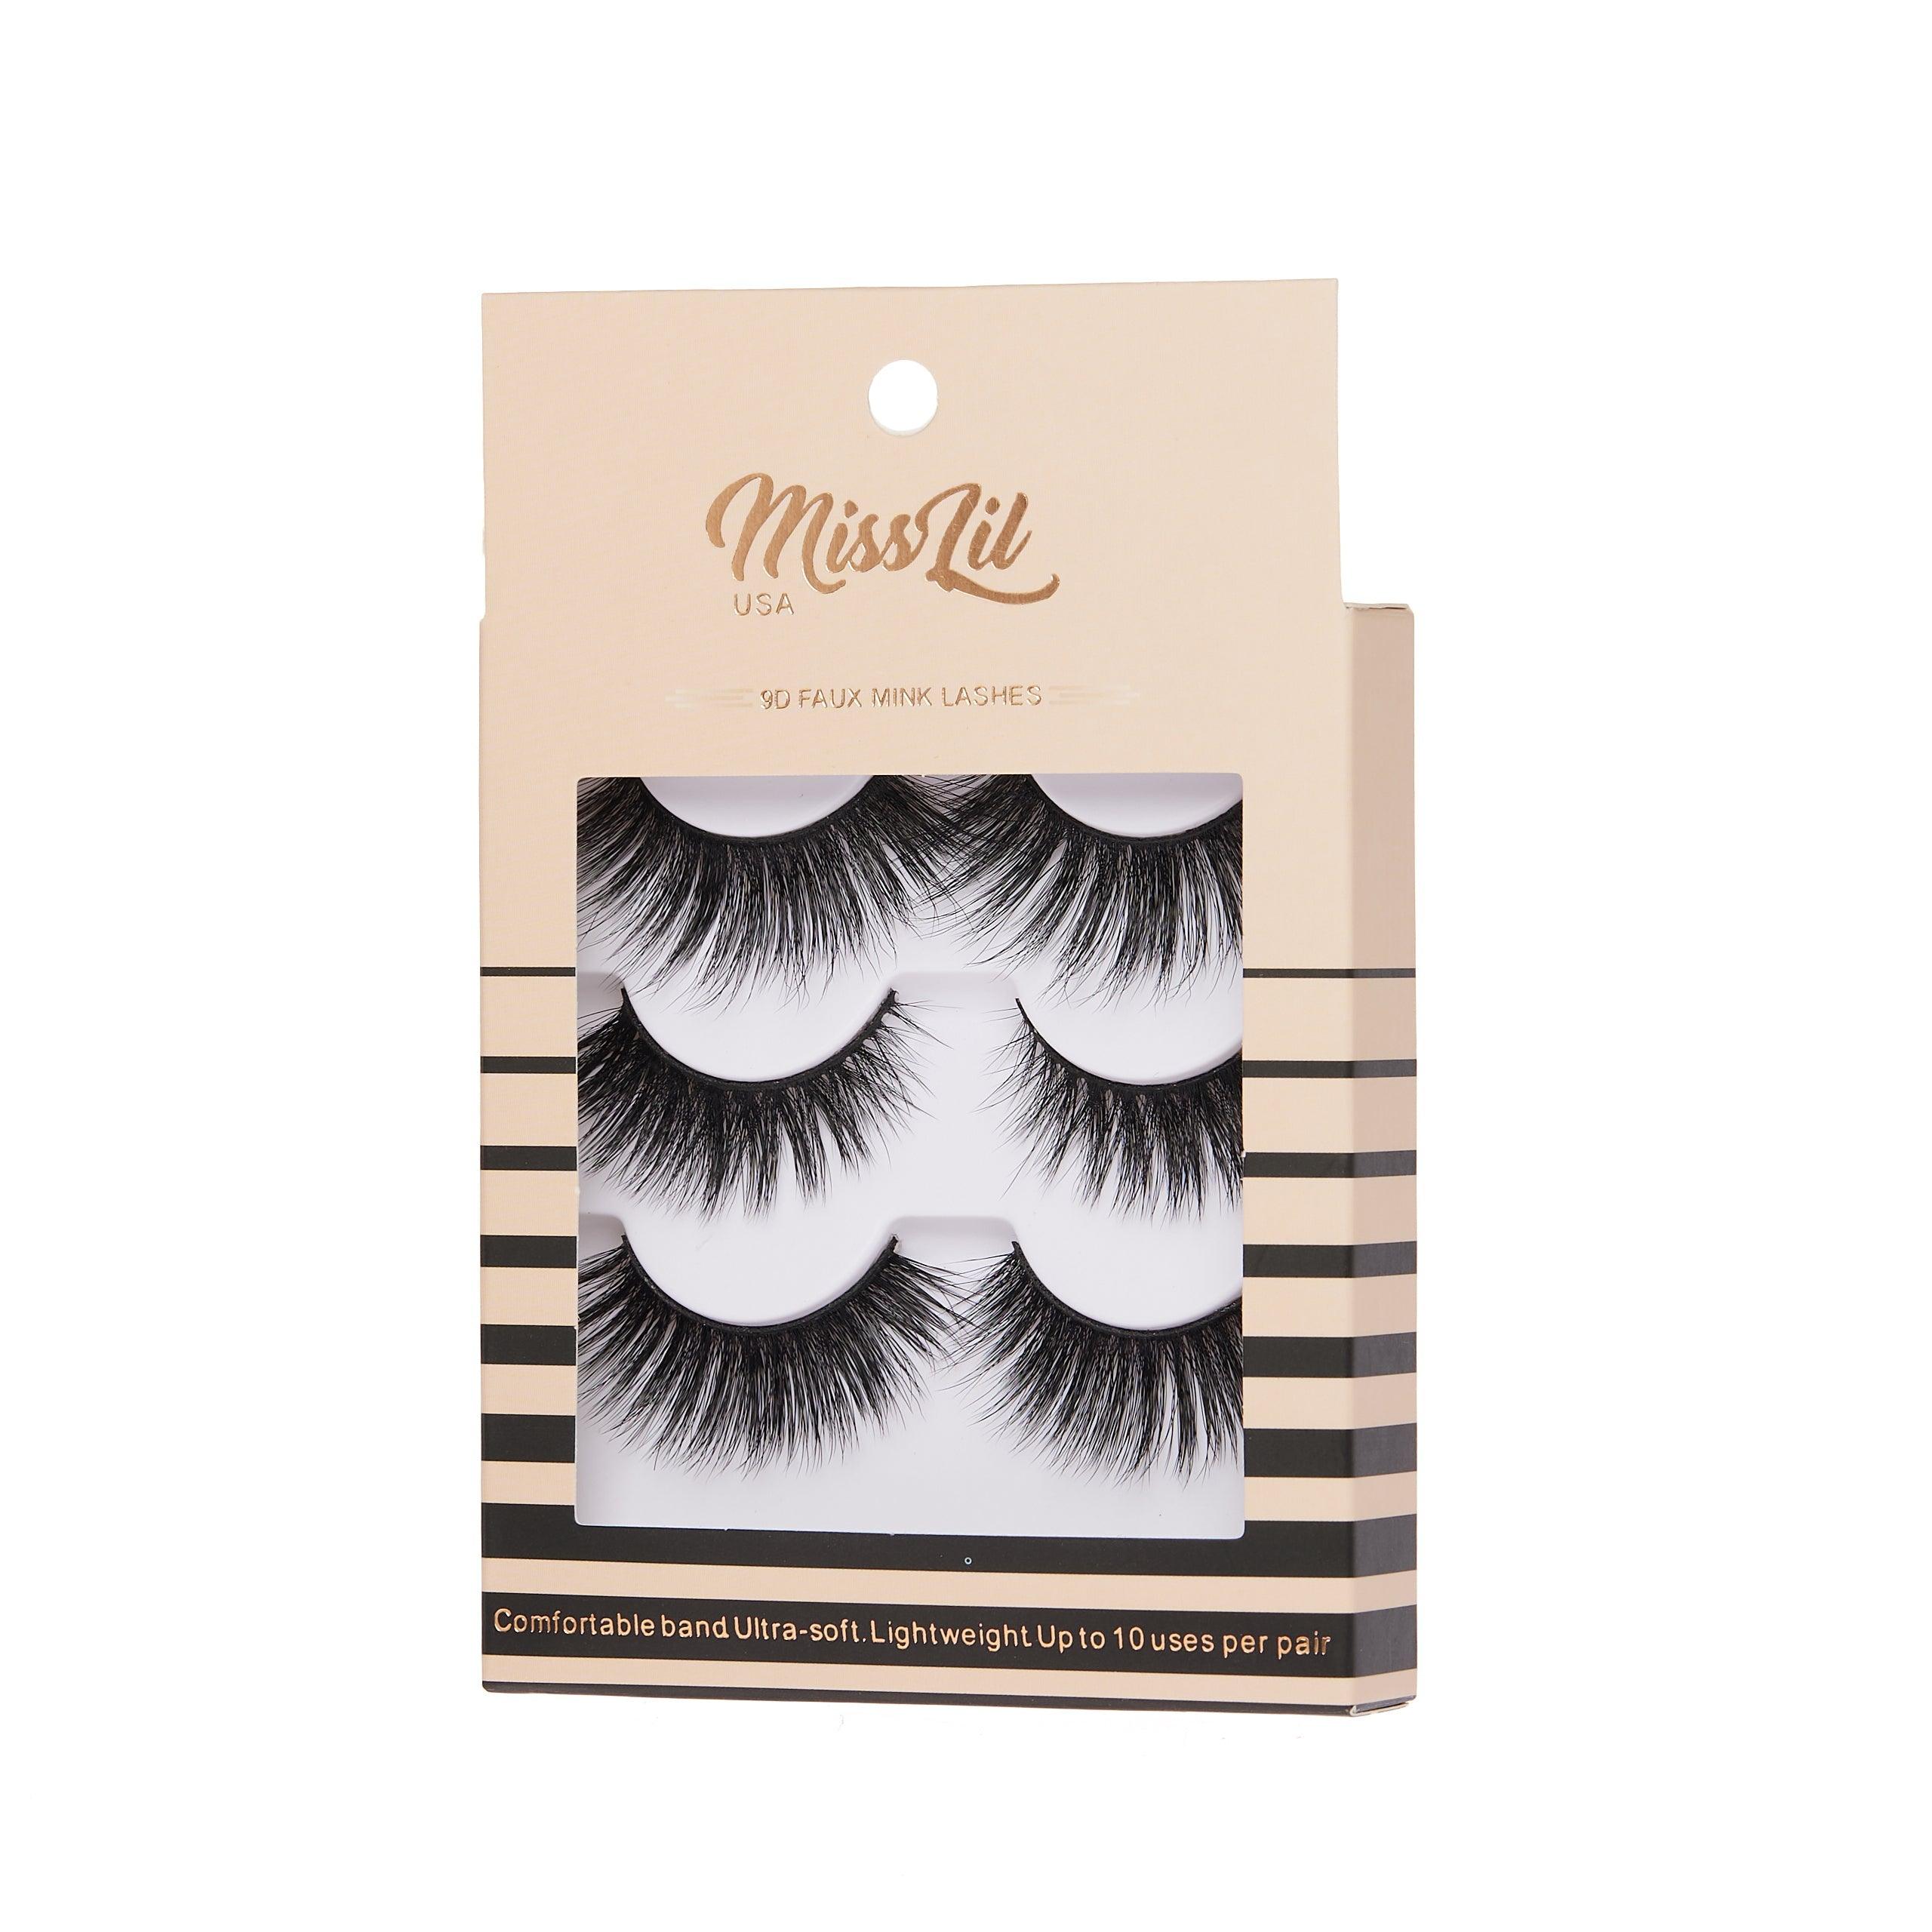 3-Pair Faux 9D Mink Eyelashes - Luxury Collection #17 - Pack of 12 - Miss Lil USA